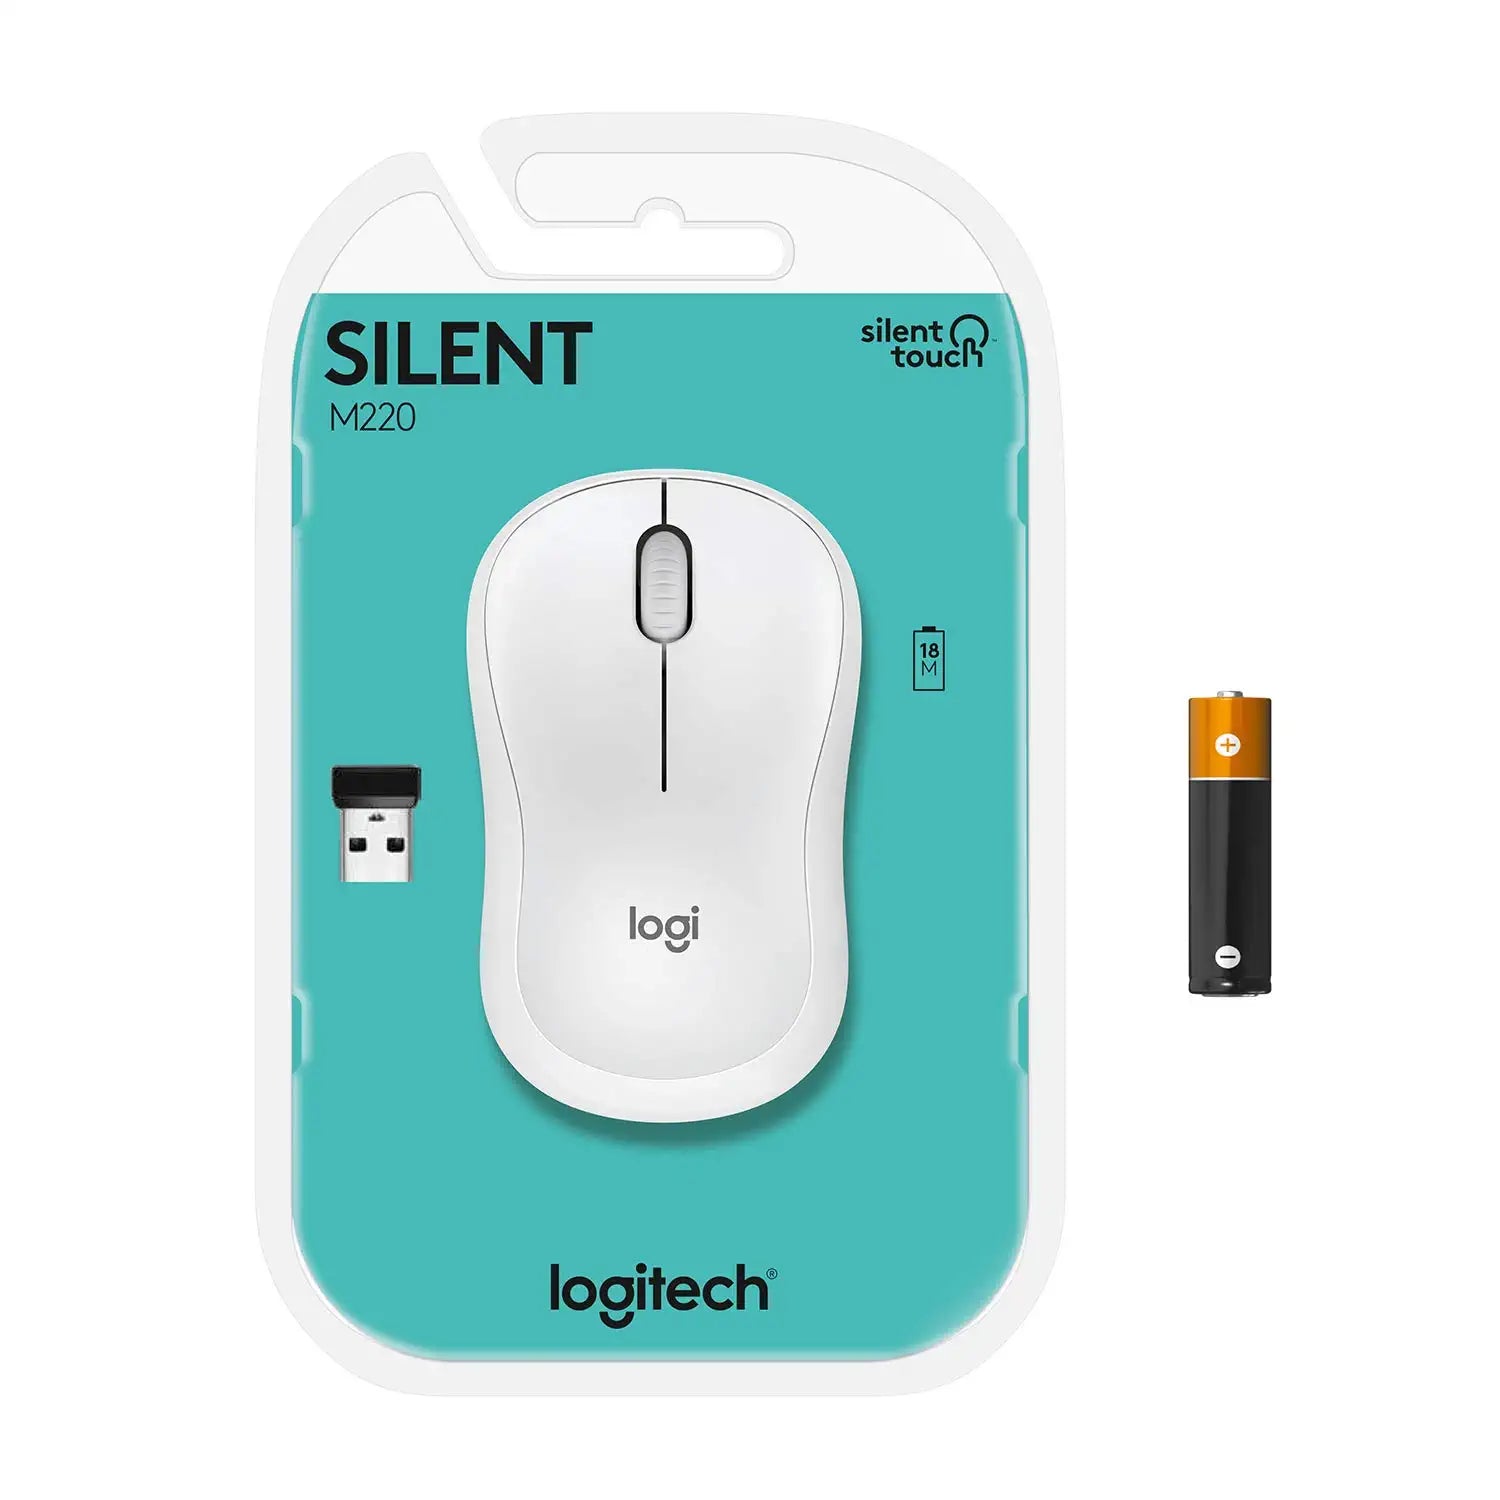 Logitech M221 Wireless Mouse, Silent Buttons, 2.4 GHz with USB Mini Receiver, 1000 DPI Optical Tracking, 18-Month Battery Life, Ambidextrous  - White